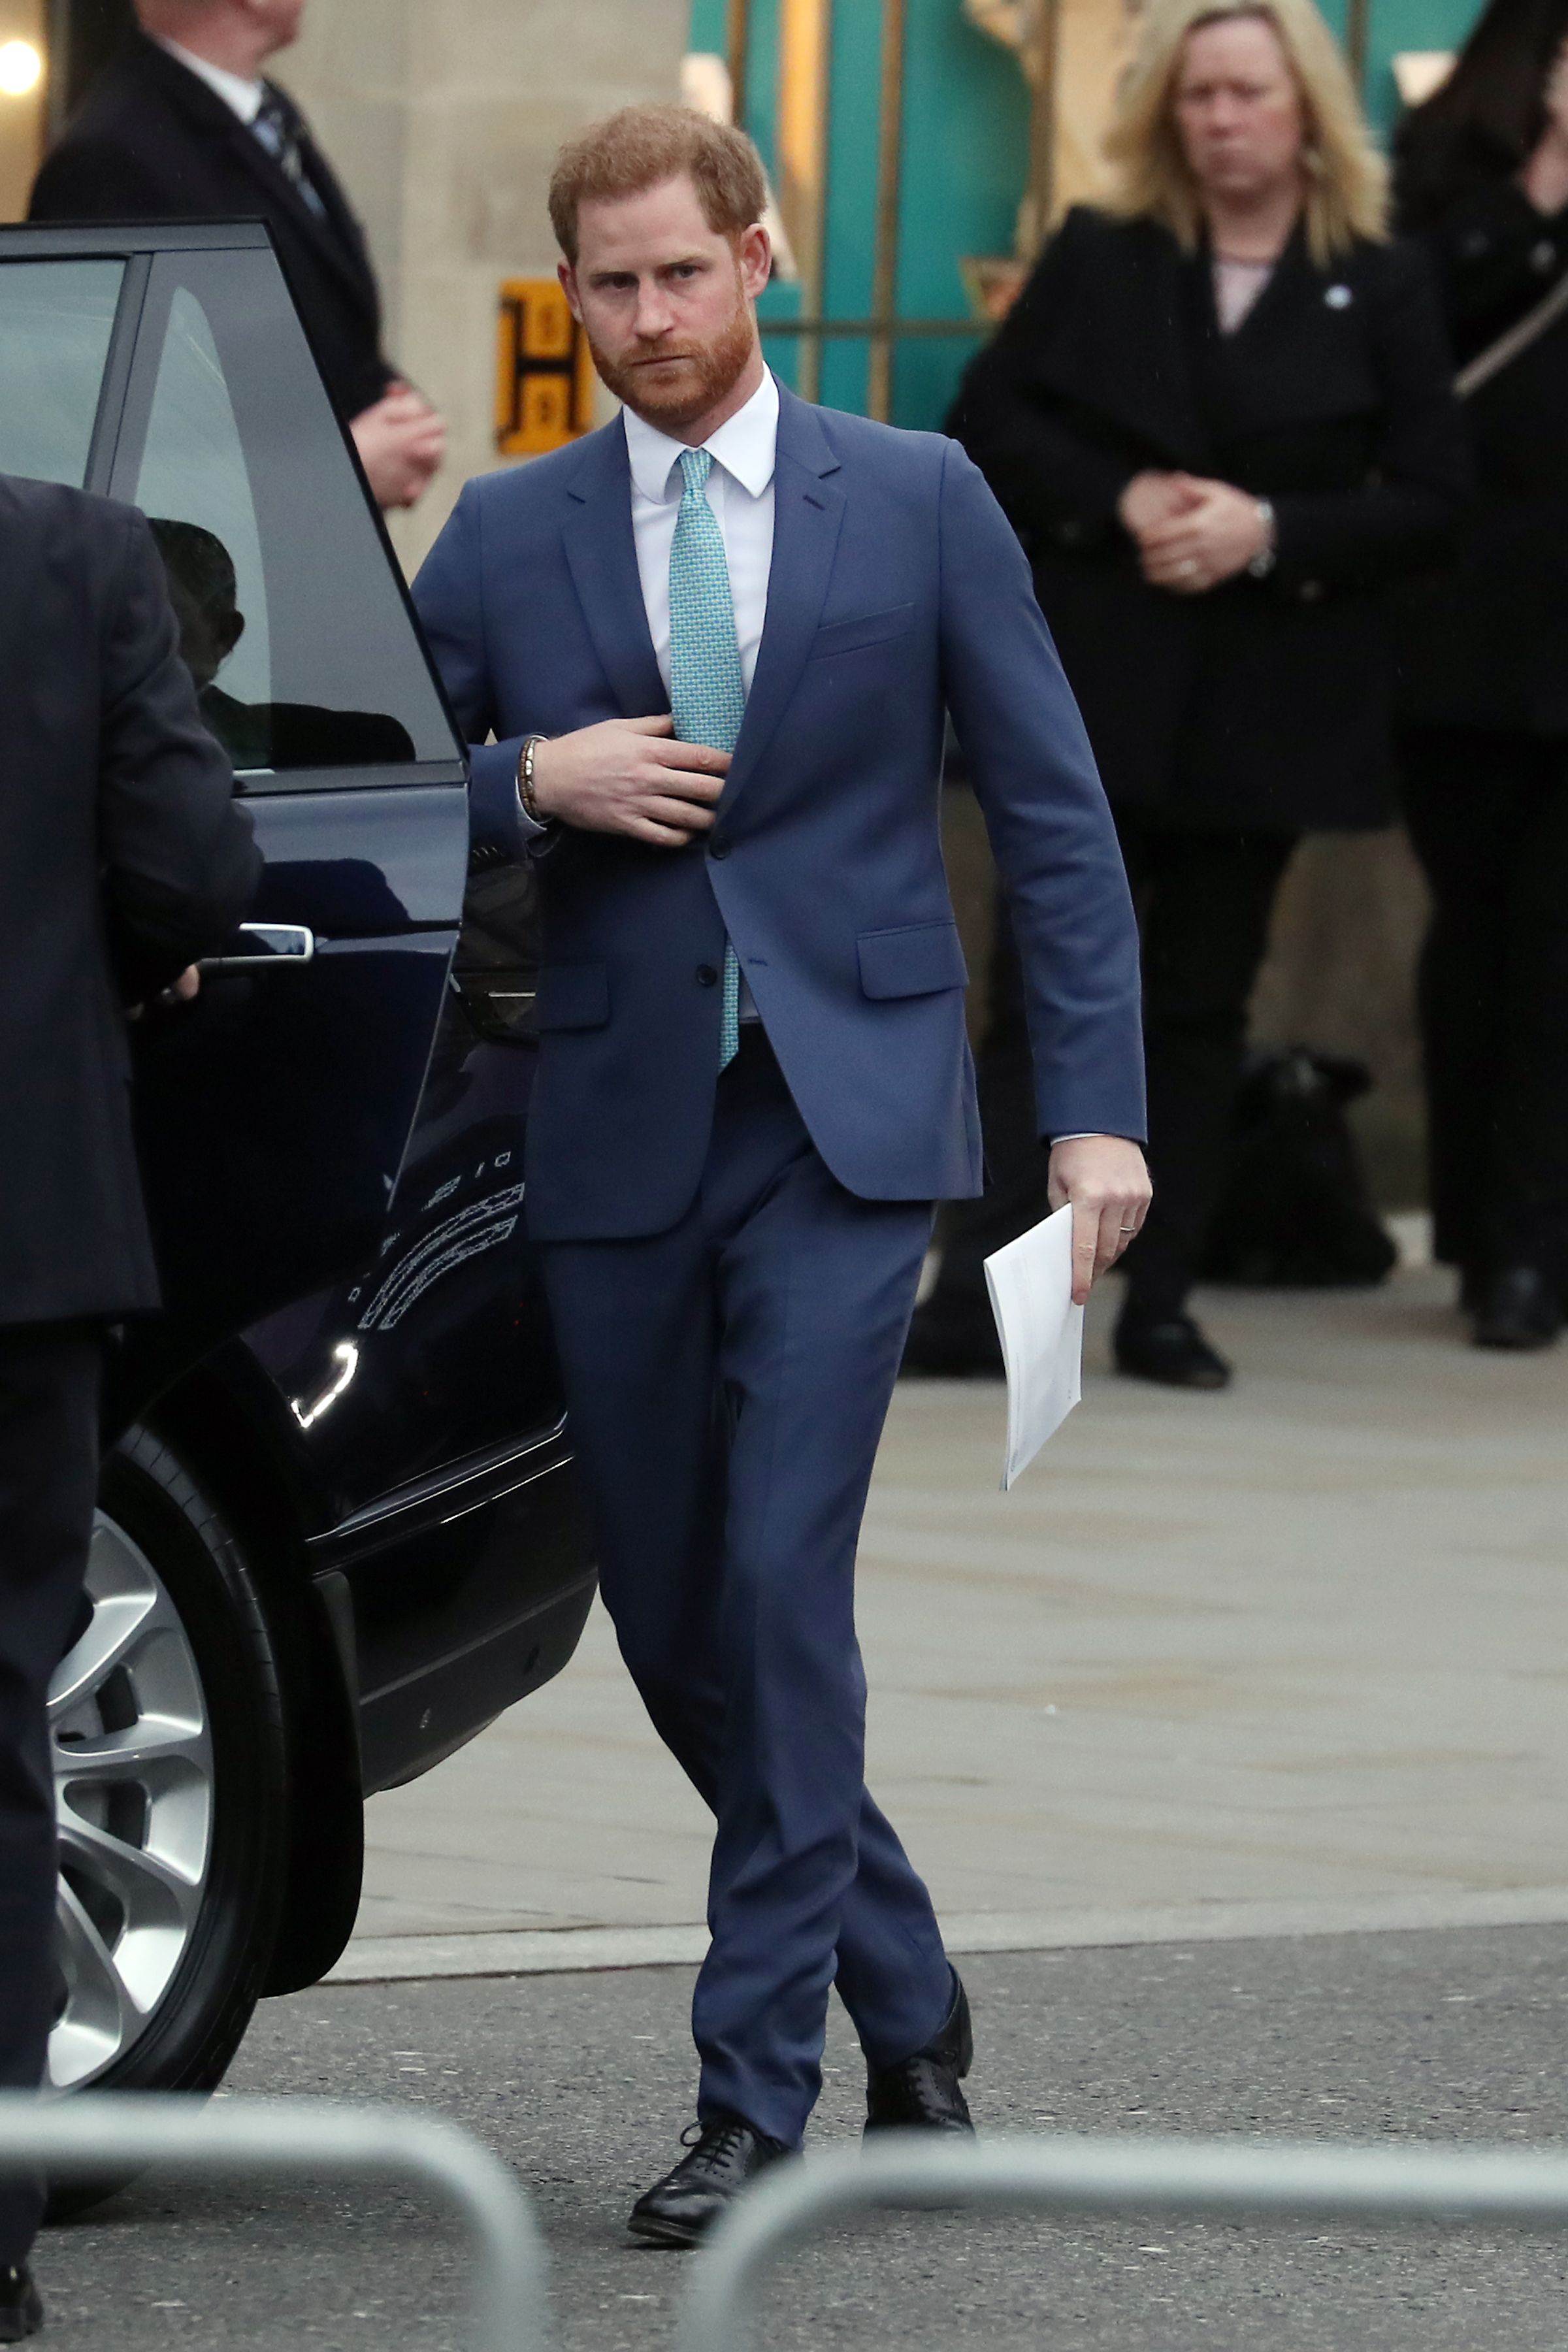 Prince Harry, Duke of Sussex at the Commonwealth Day Service 2020 in March in London, England | Source: Getty Images